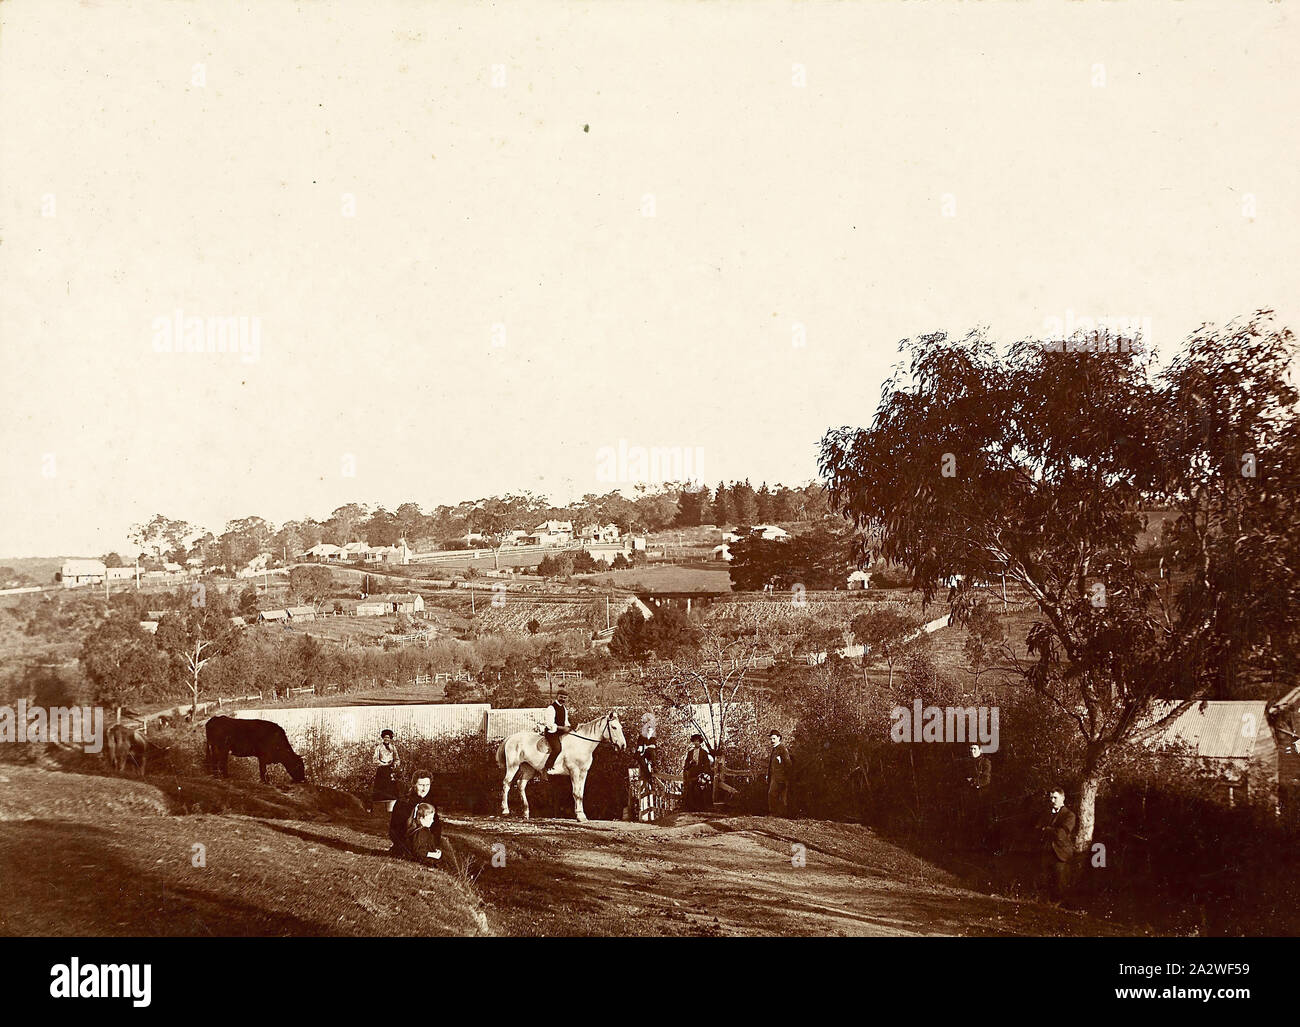 Digital Photograph - View from 'Willis Vale', Greensborough, Victoria, circa 1902, View looking south from the Partington family property 'Willis Vale' at Greensborough. The property was situated on a hill sloping down to the Plenty River. On a portion of the property was the orchard leased by Robert Whatmough for his nursery business. In the foreground are members of the Partington Family who lived in the main house. The orchard is directly behind them and follows the white Stock Photo